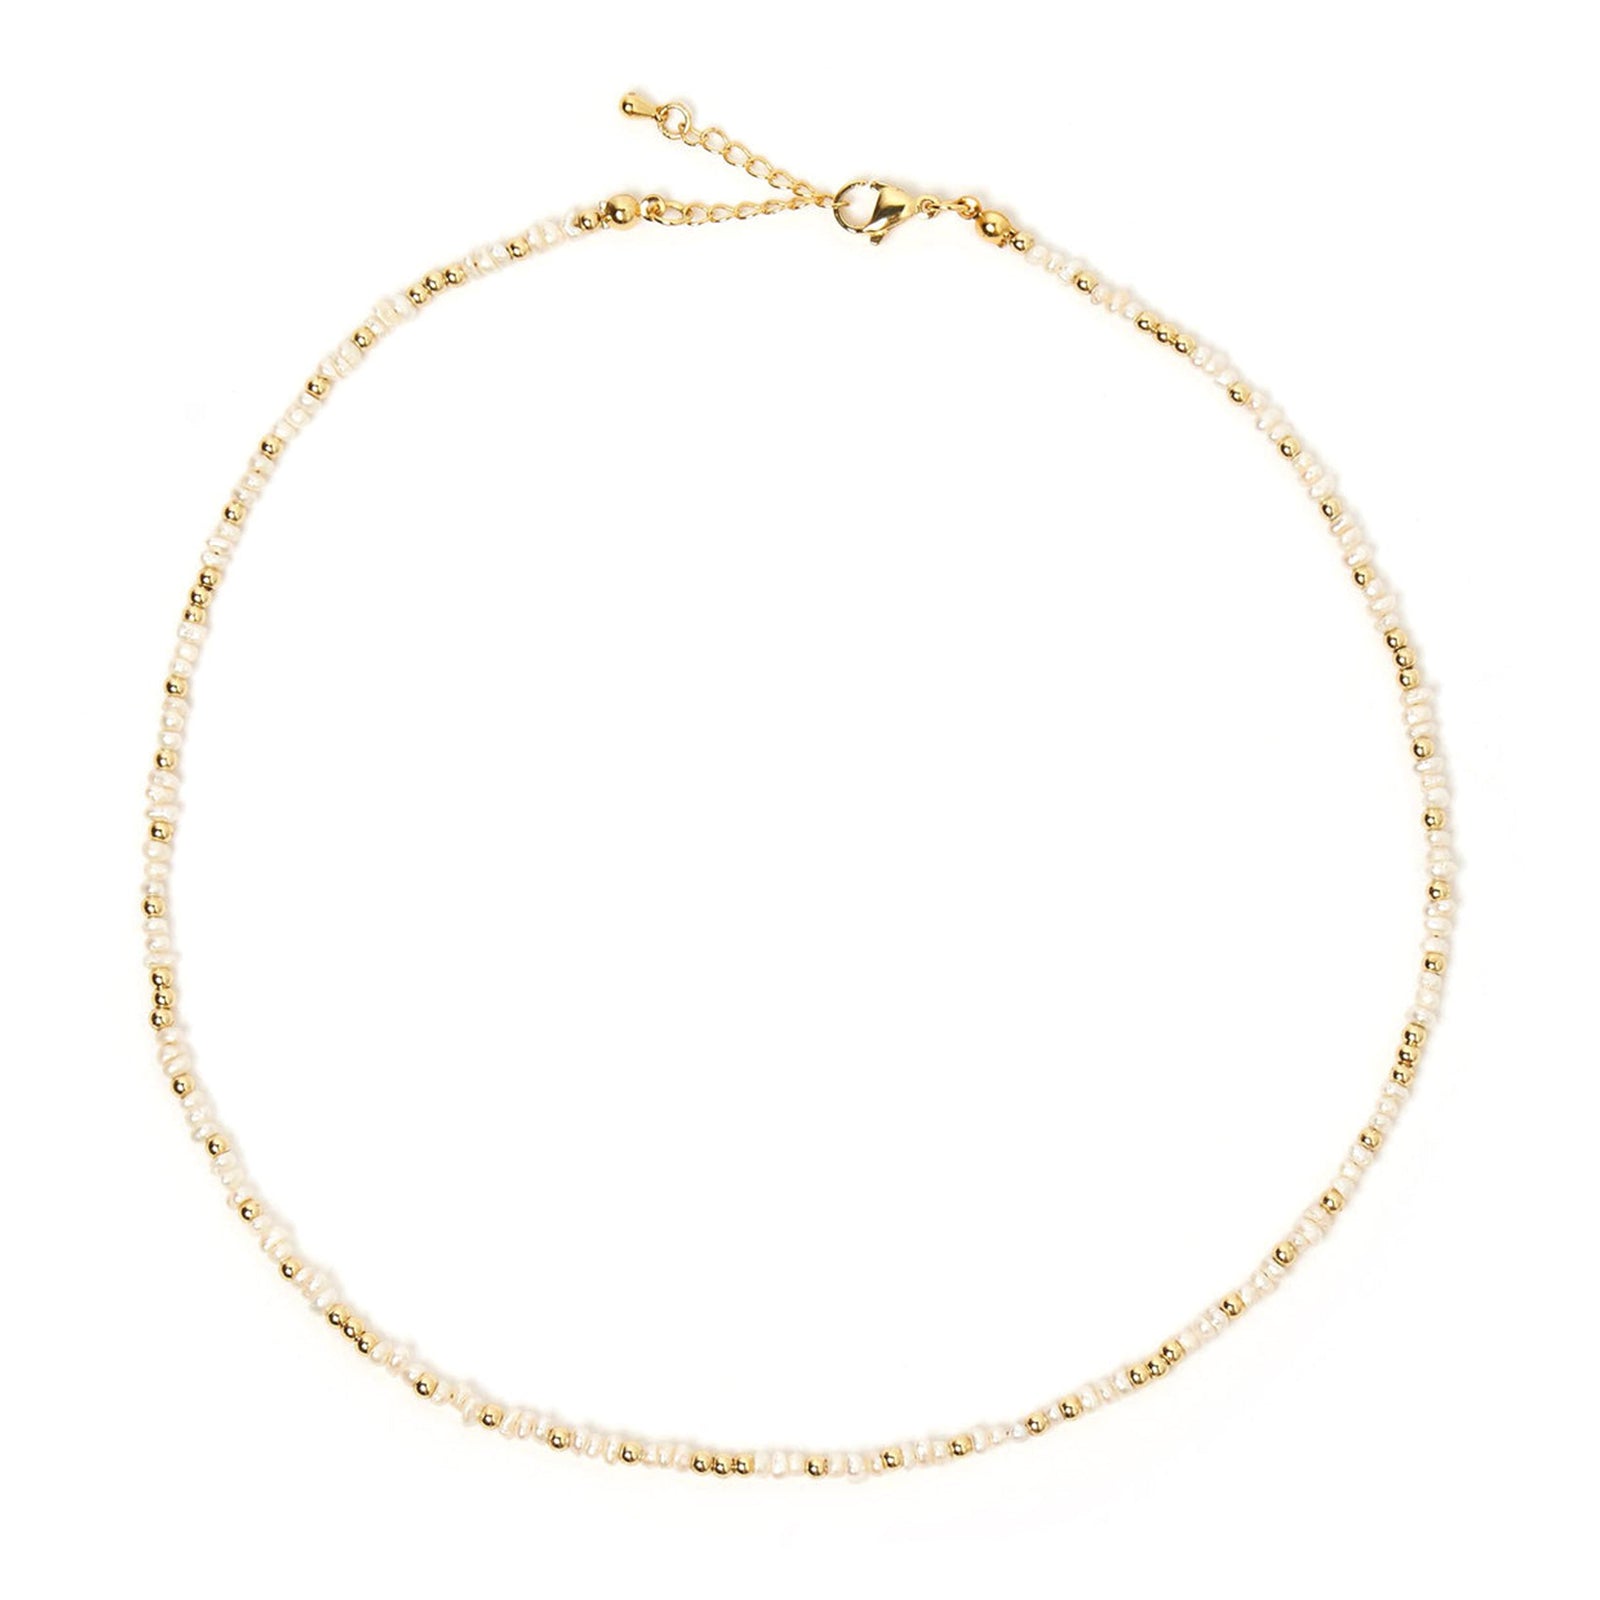 Lucia Pearl and Gold Necklace